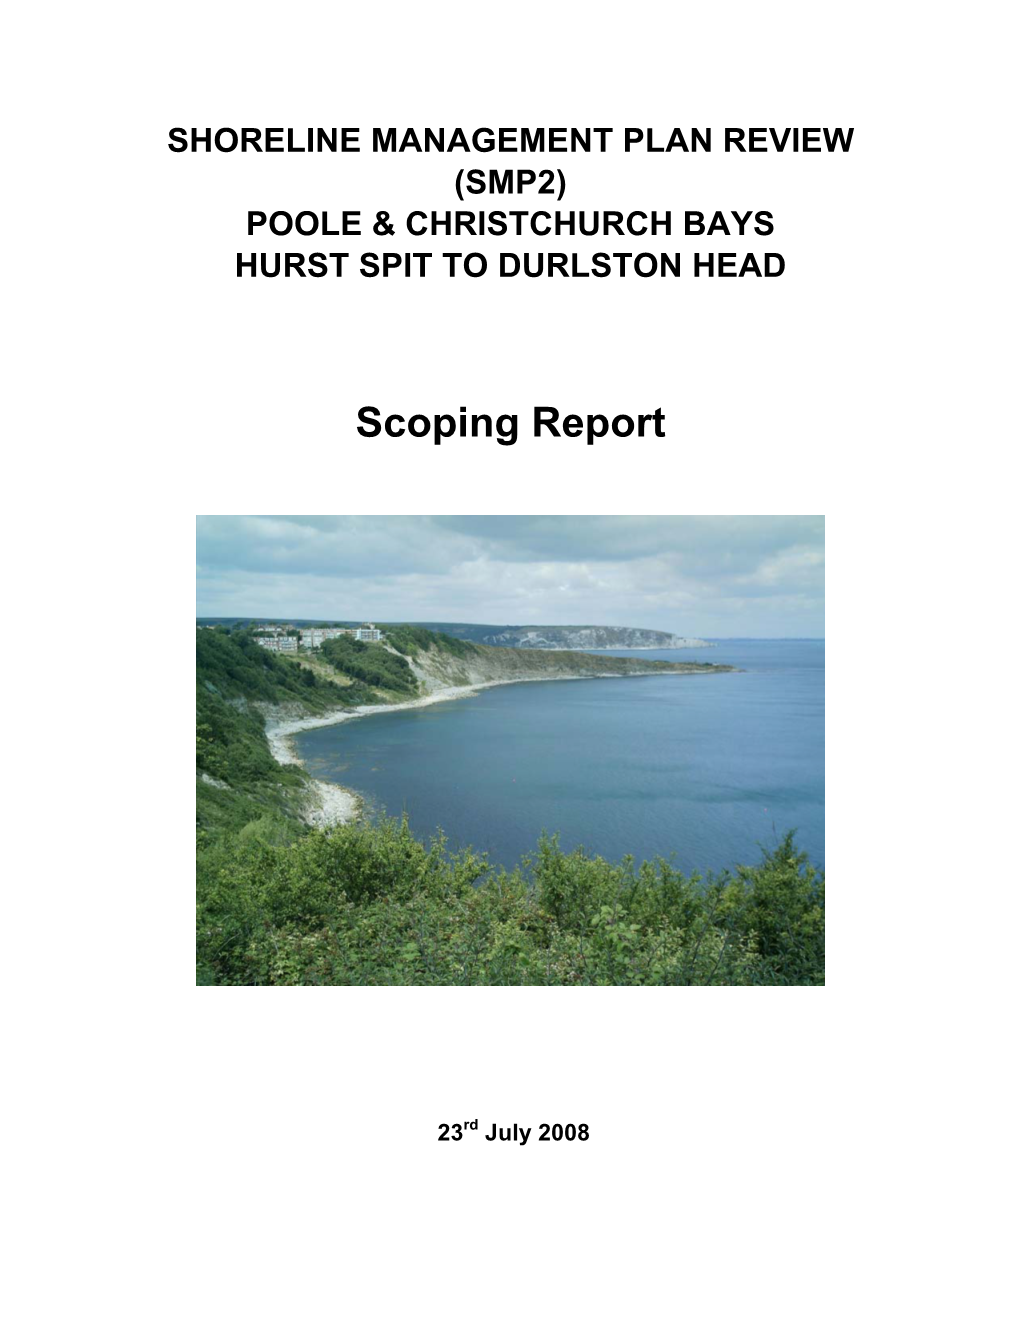 Poole & Christchurch Bays SMP2 Scoping Report